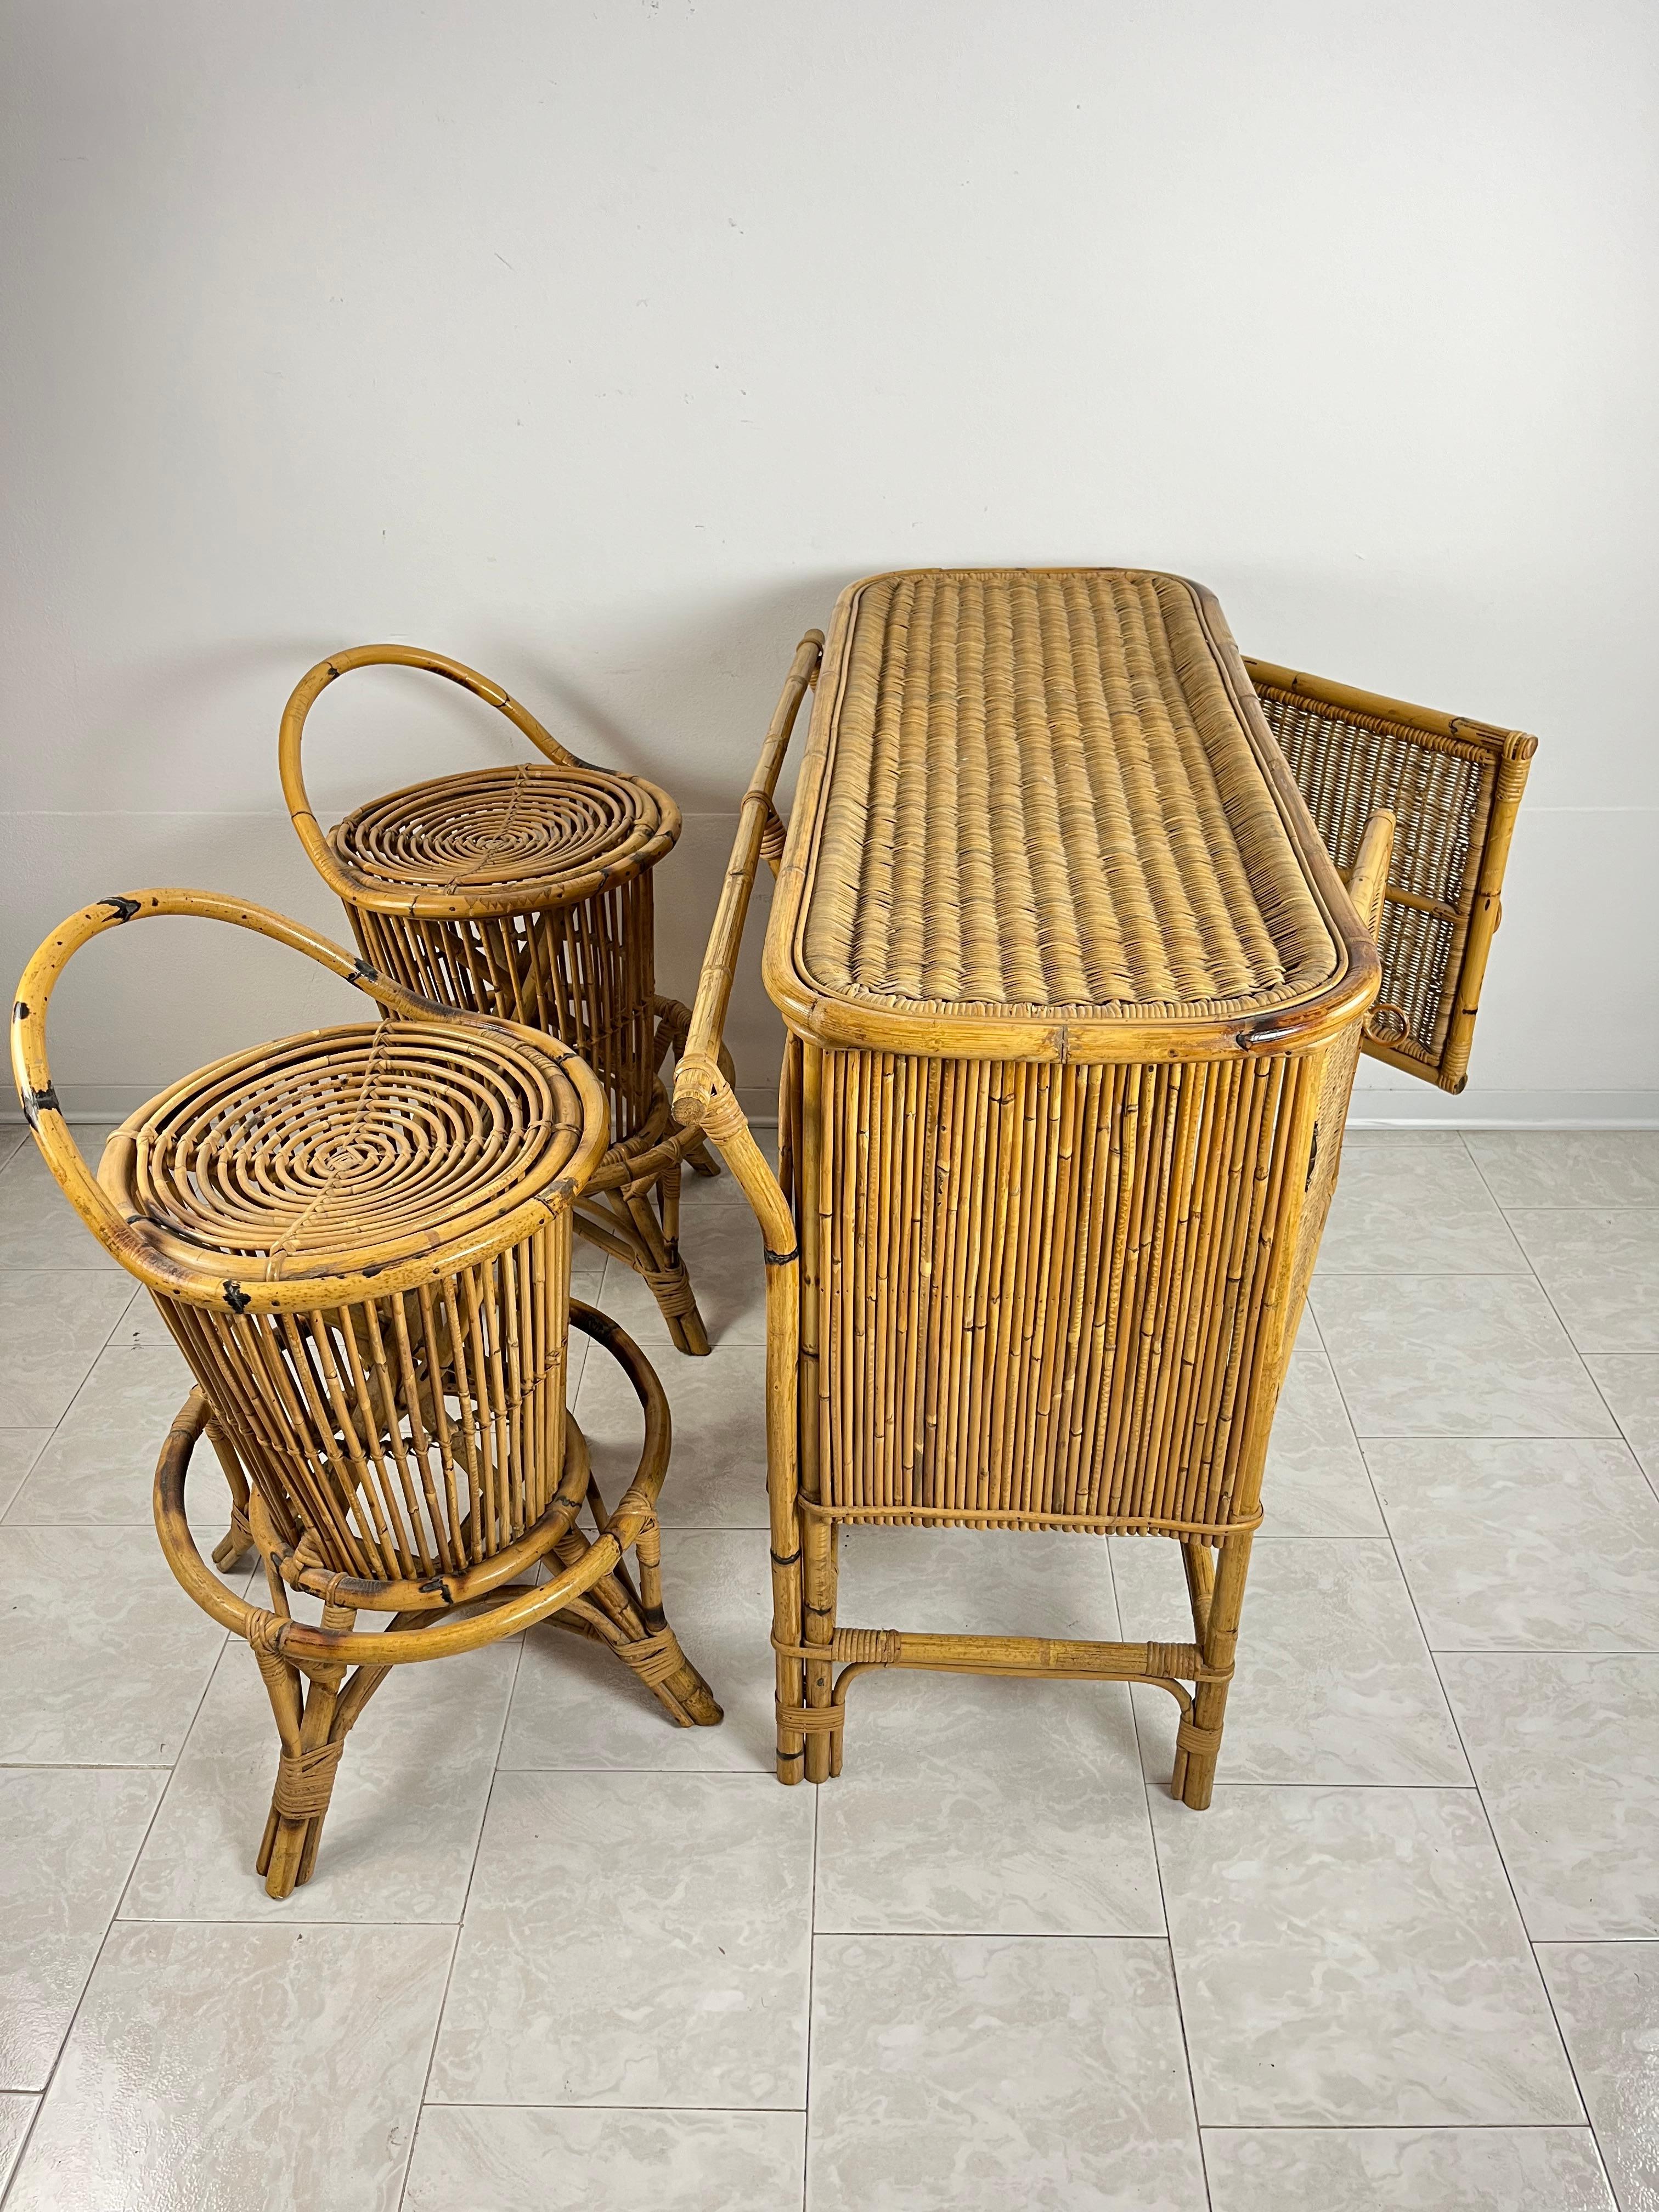 Italian Bamboo and Wicker Bar Cabinet With Stools Attributed to Tito Agnoli, 1950s 3 Pcs